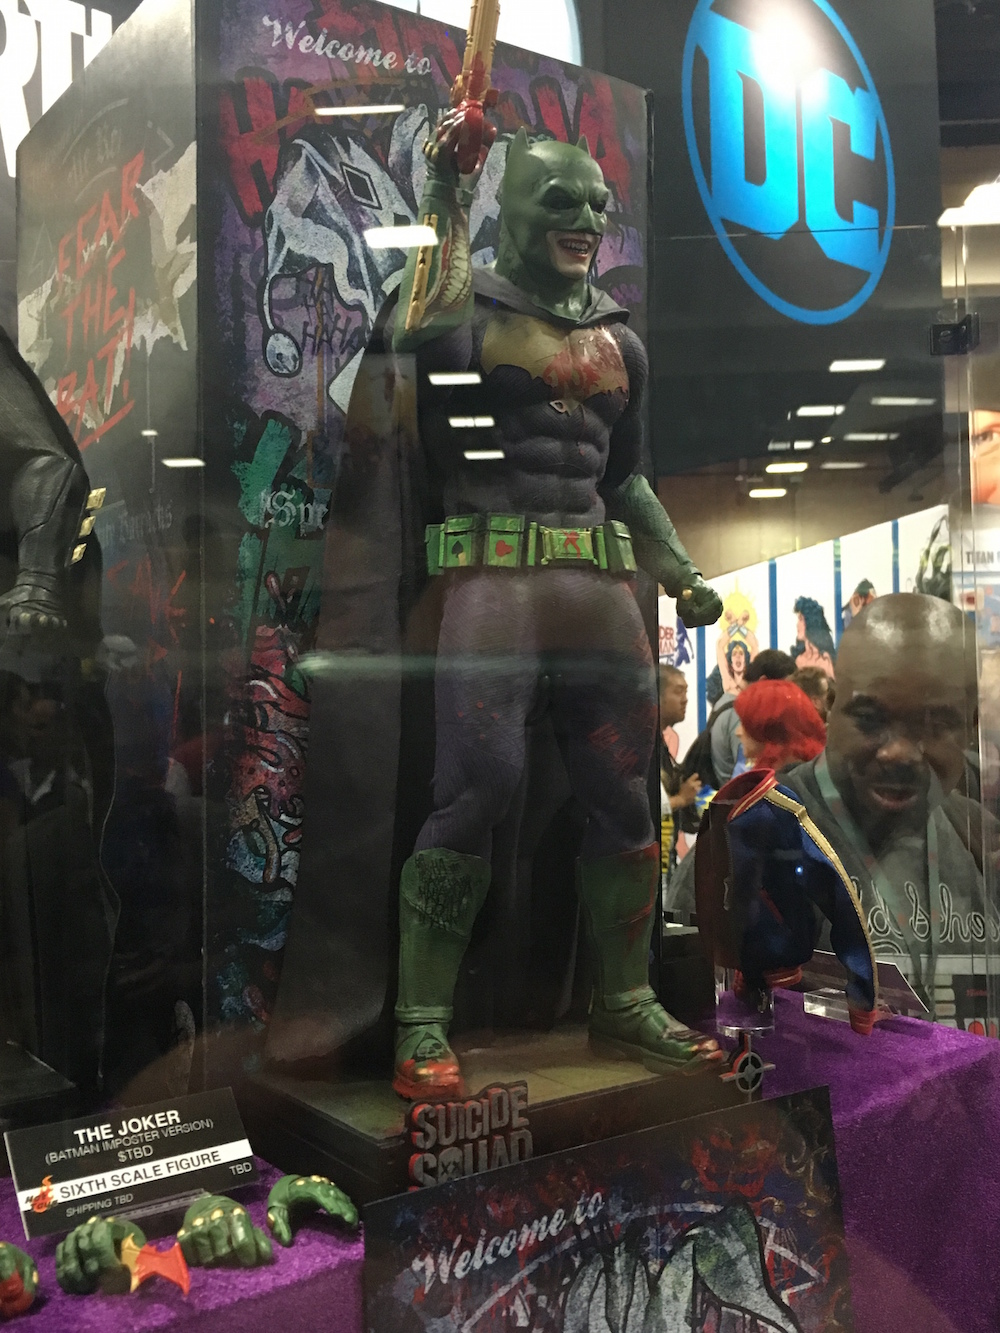 Hot Toys May Have Accidentally Revealed A Crazy Suicide Squad Spoiler